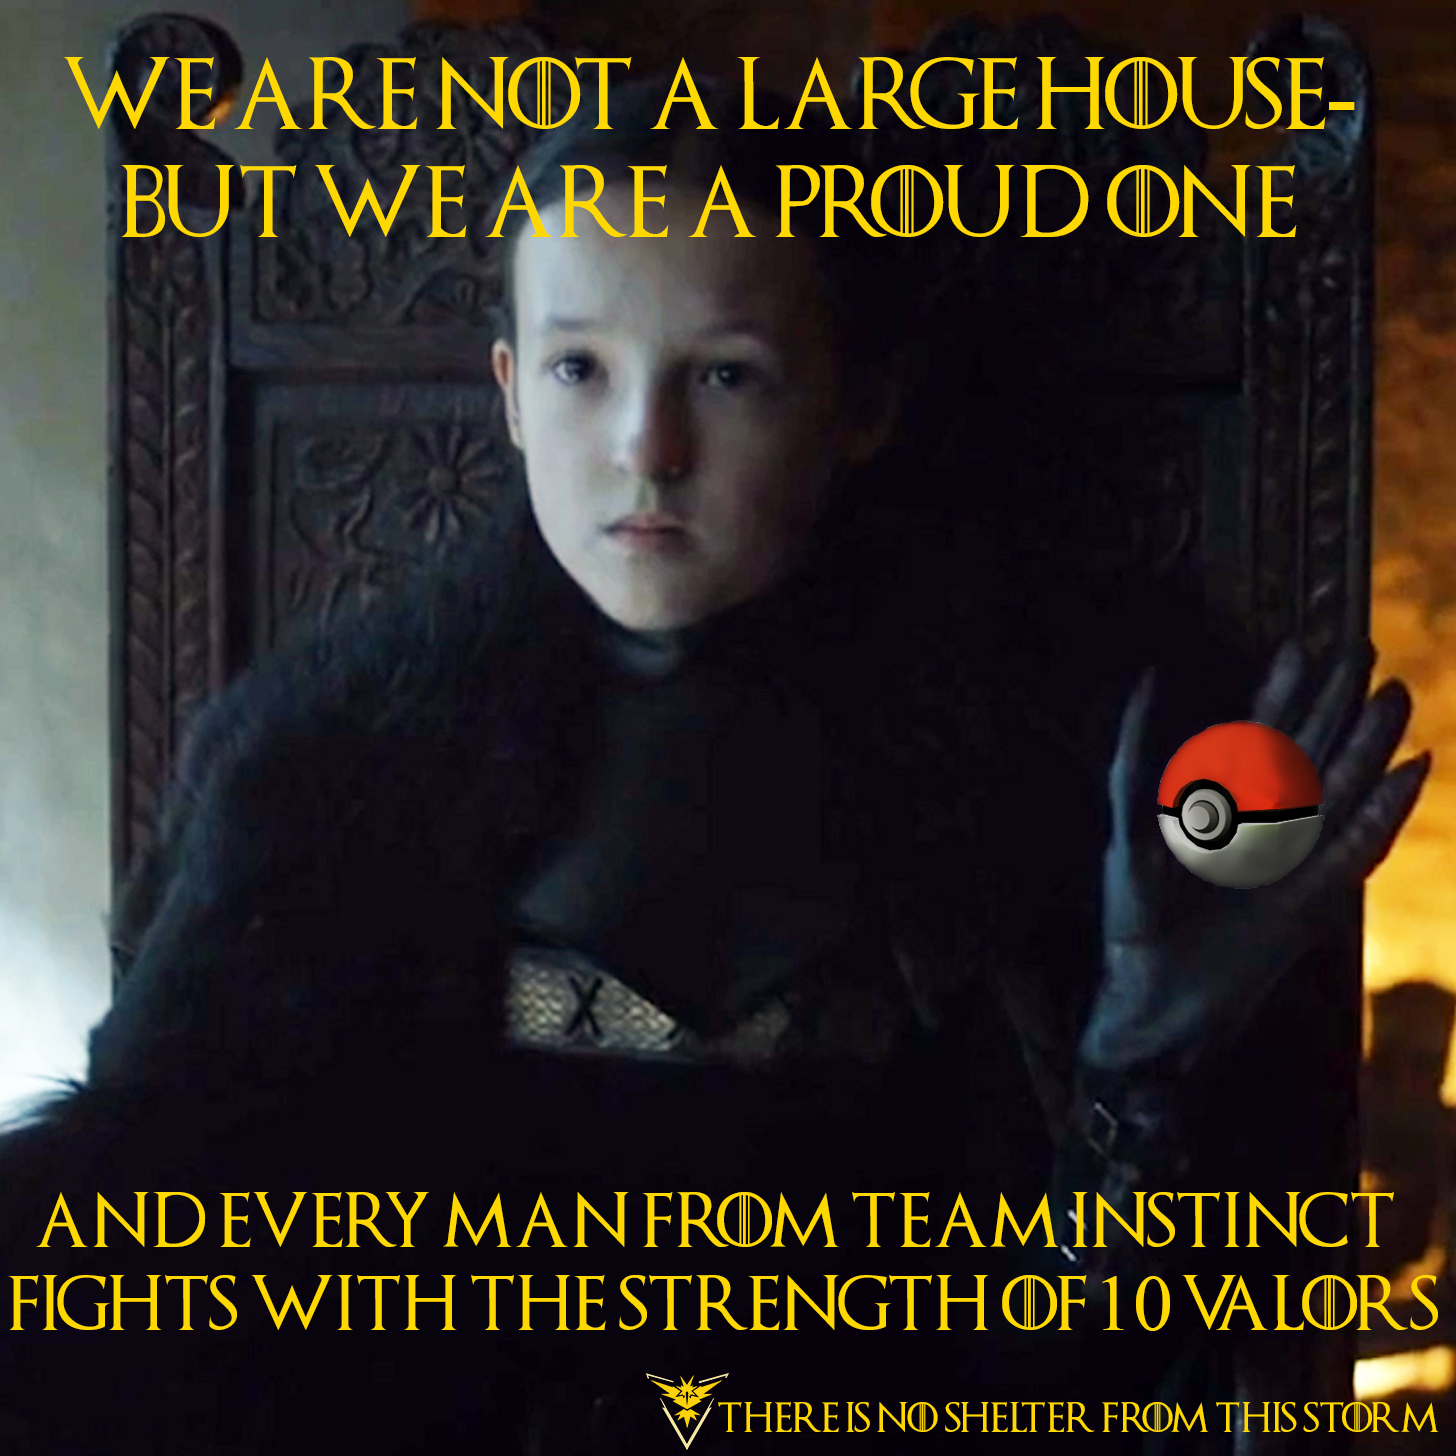 meme - team instinct meme - We Are Not A Large House But We Are A Proud One And Every Man From Teaminstinct Fights With The Strength Of 10 Valors There Is No Shelter From This Storm